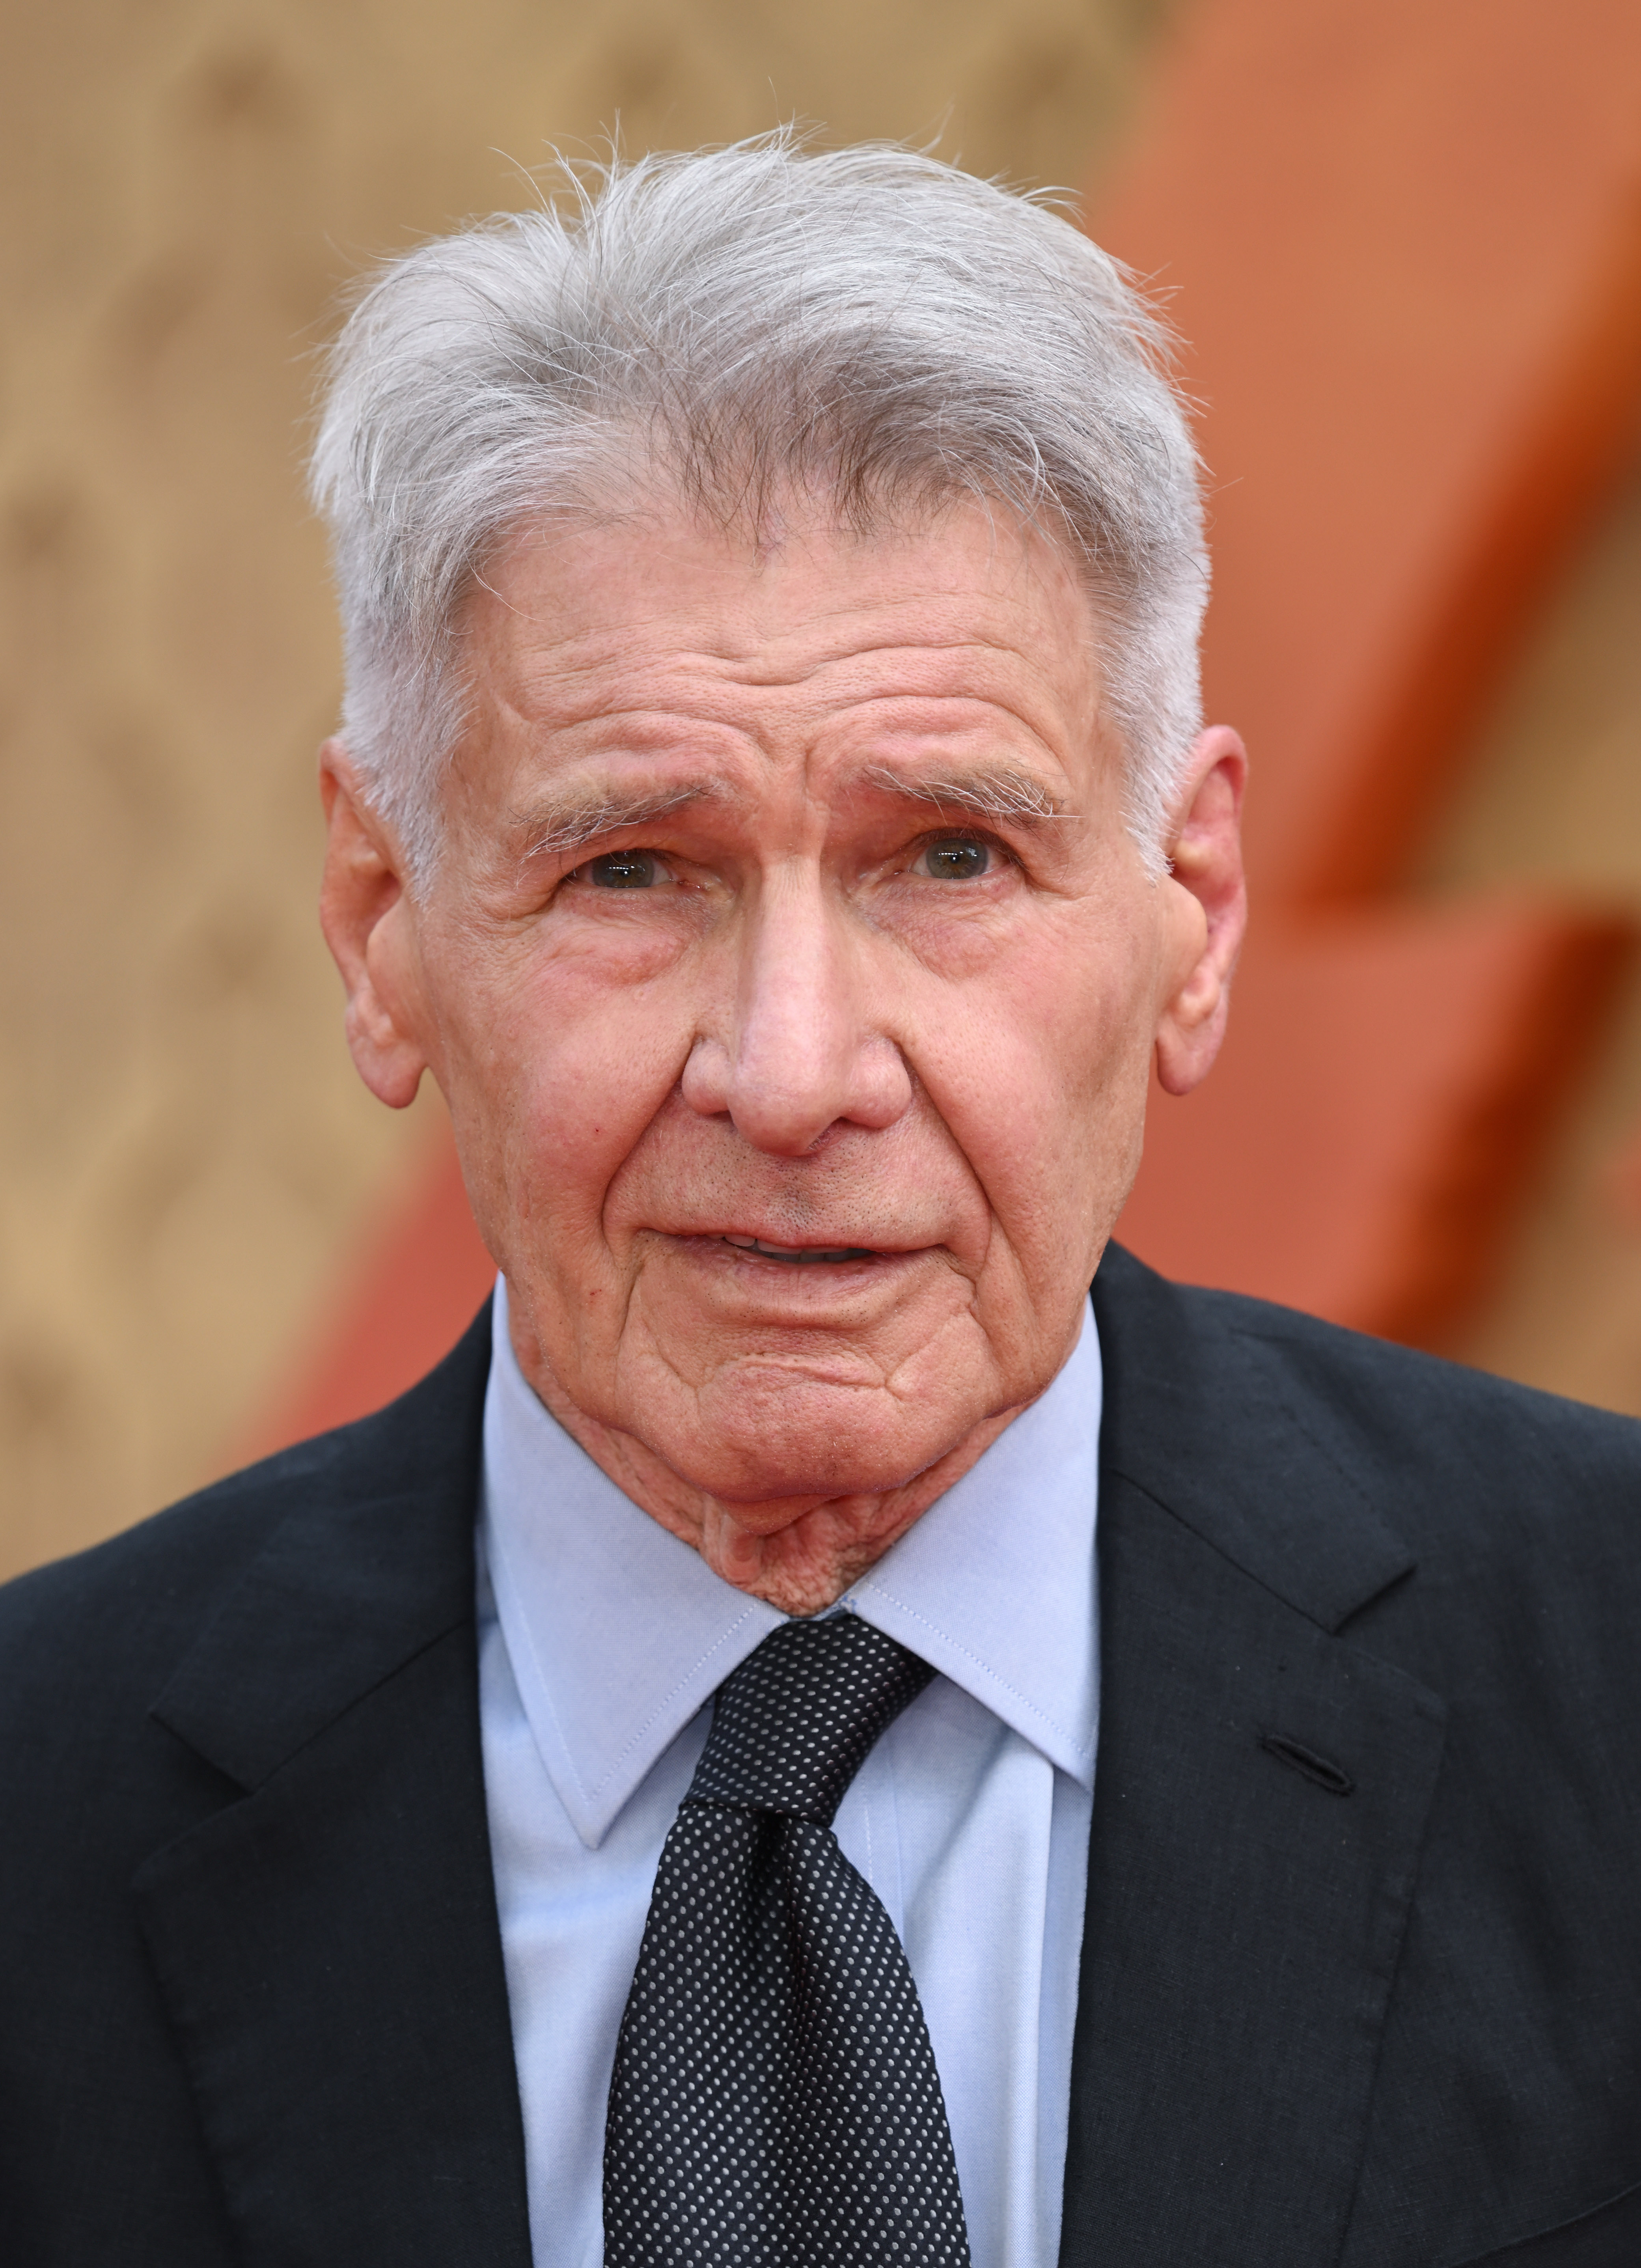 Harrison Ford | Source : Getty Images